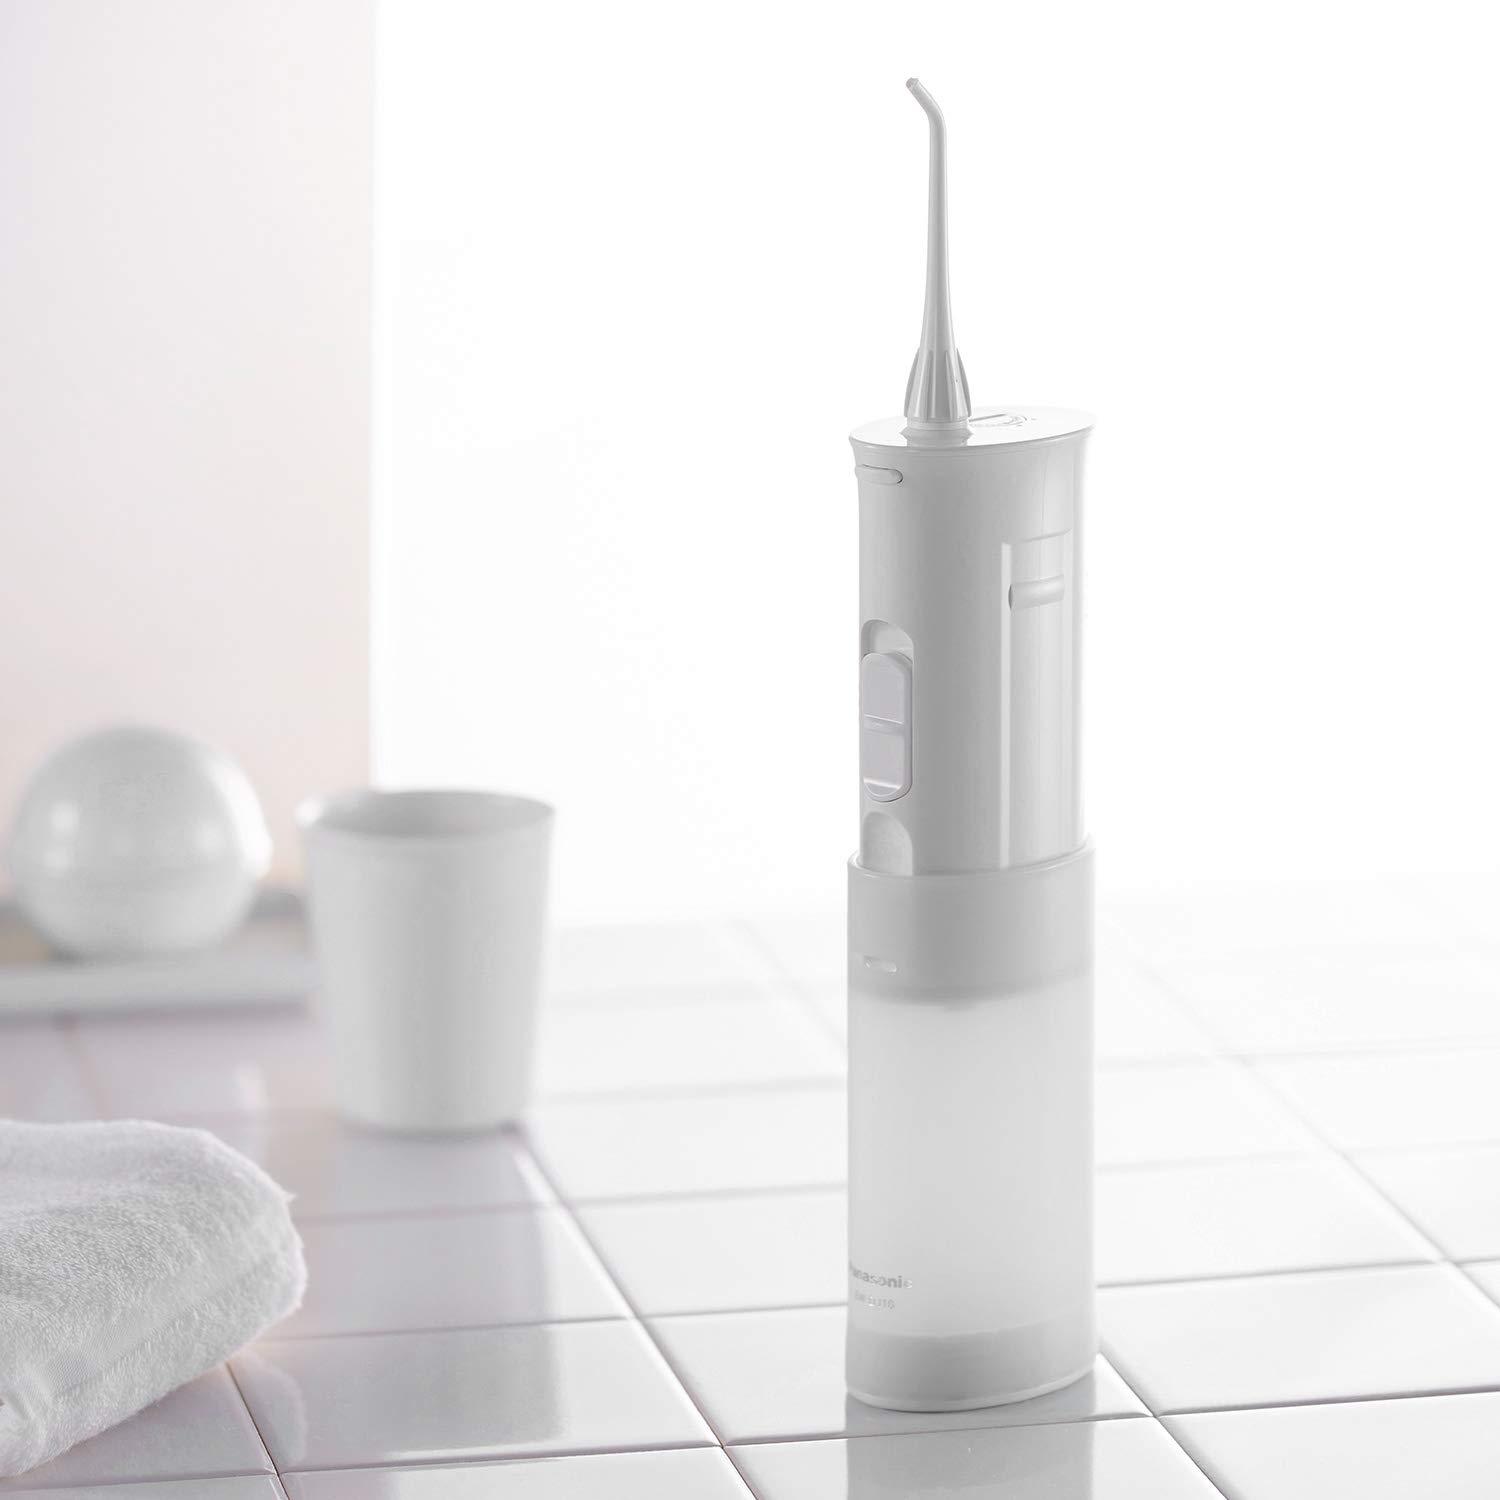 Panasonic Portable Water Flosser, 2-Speed Battery-Operated Oral